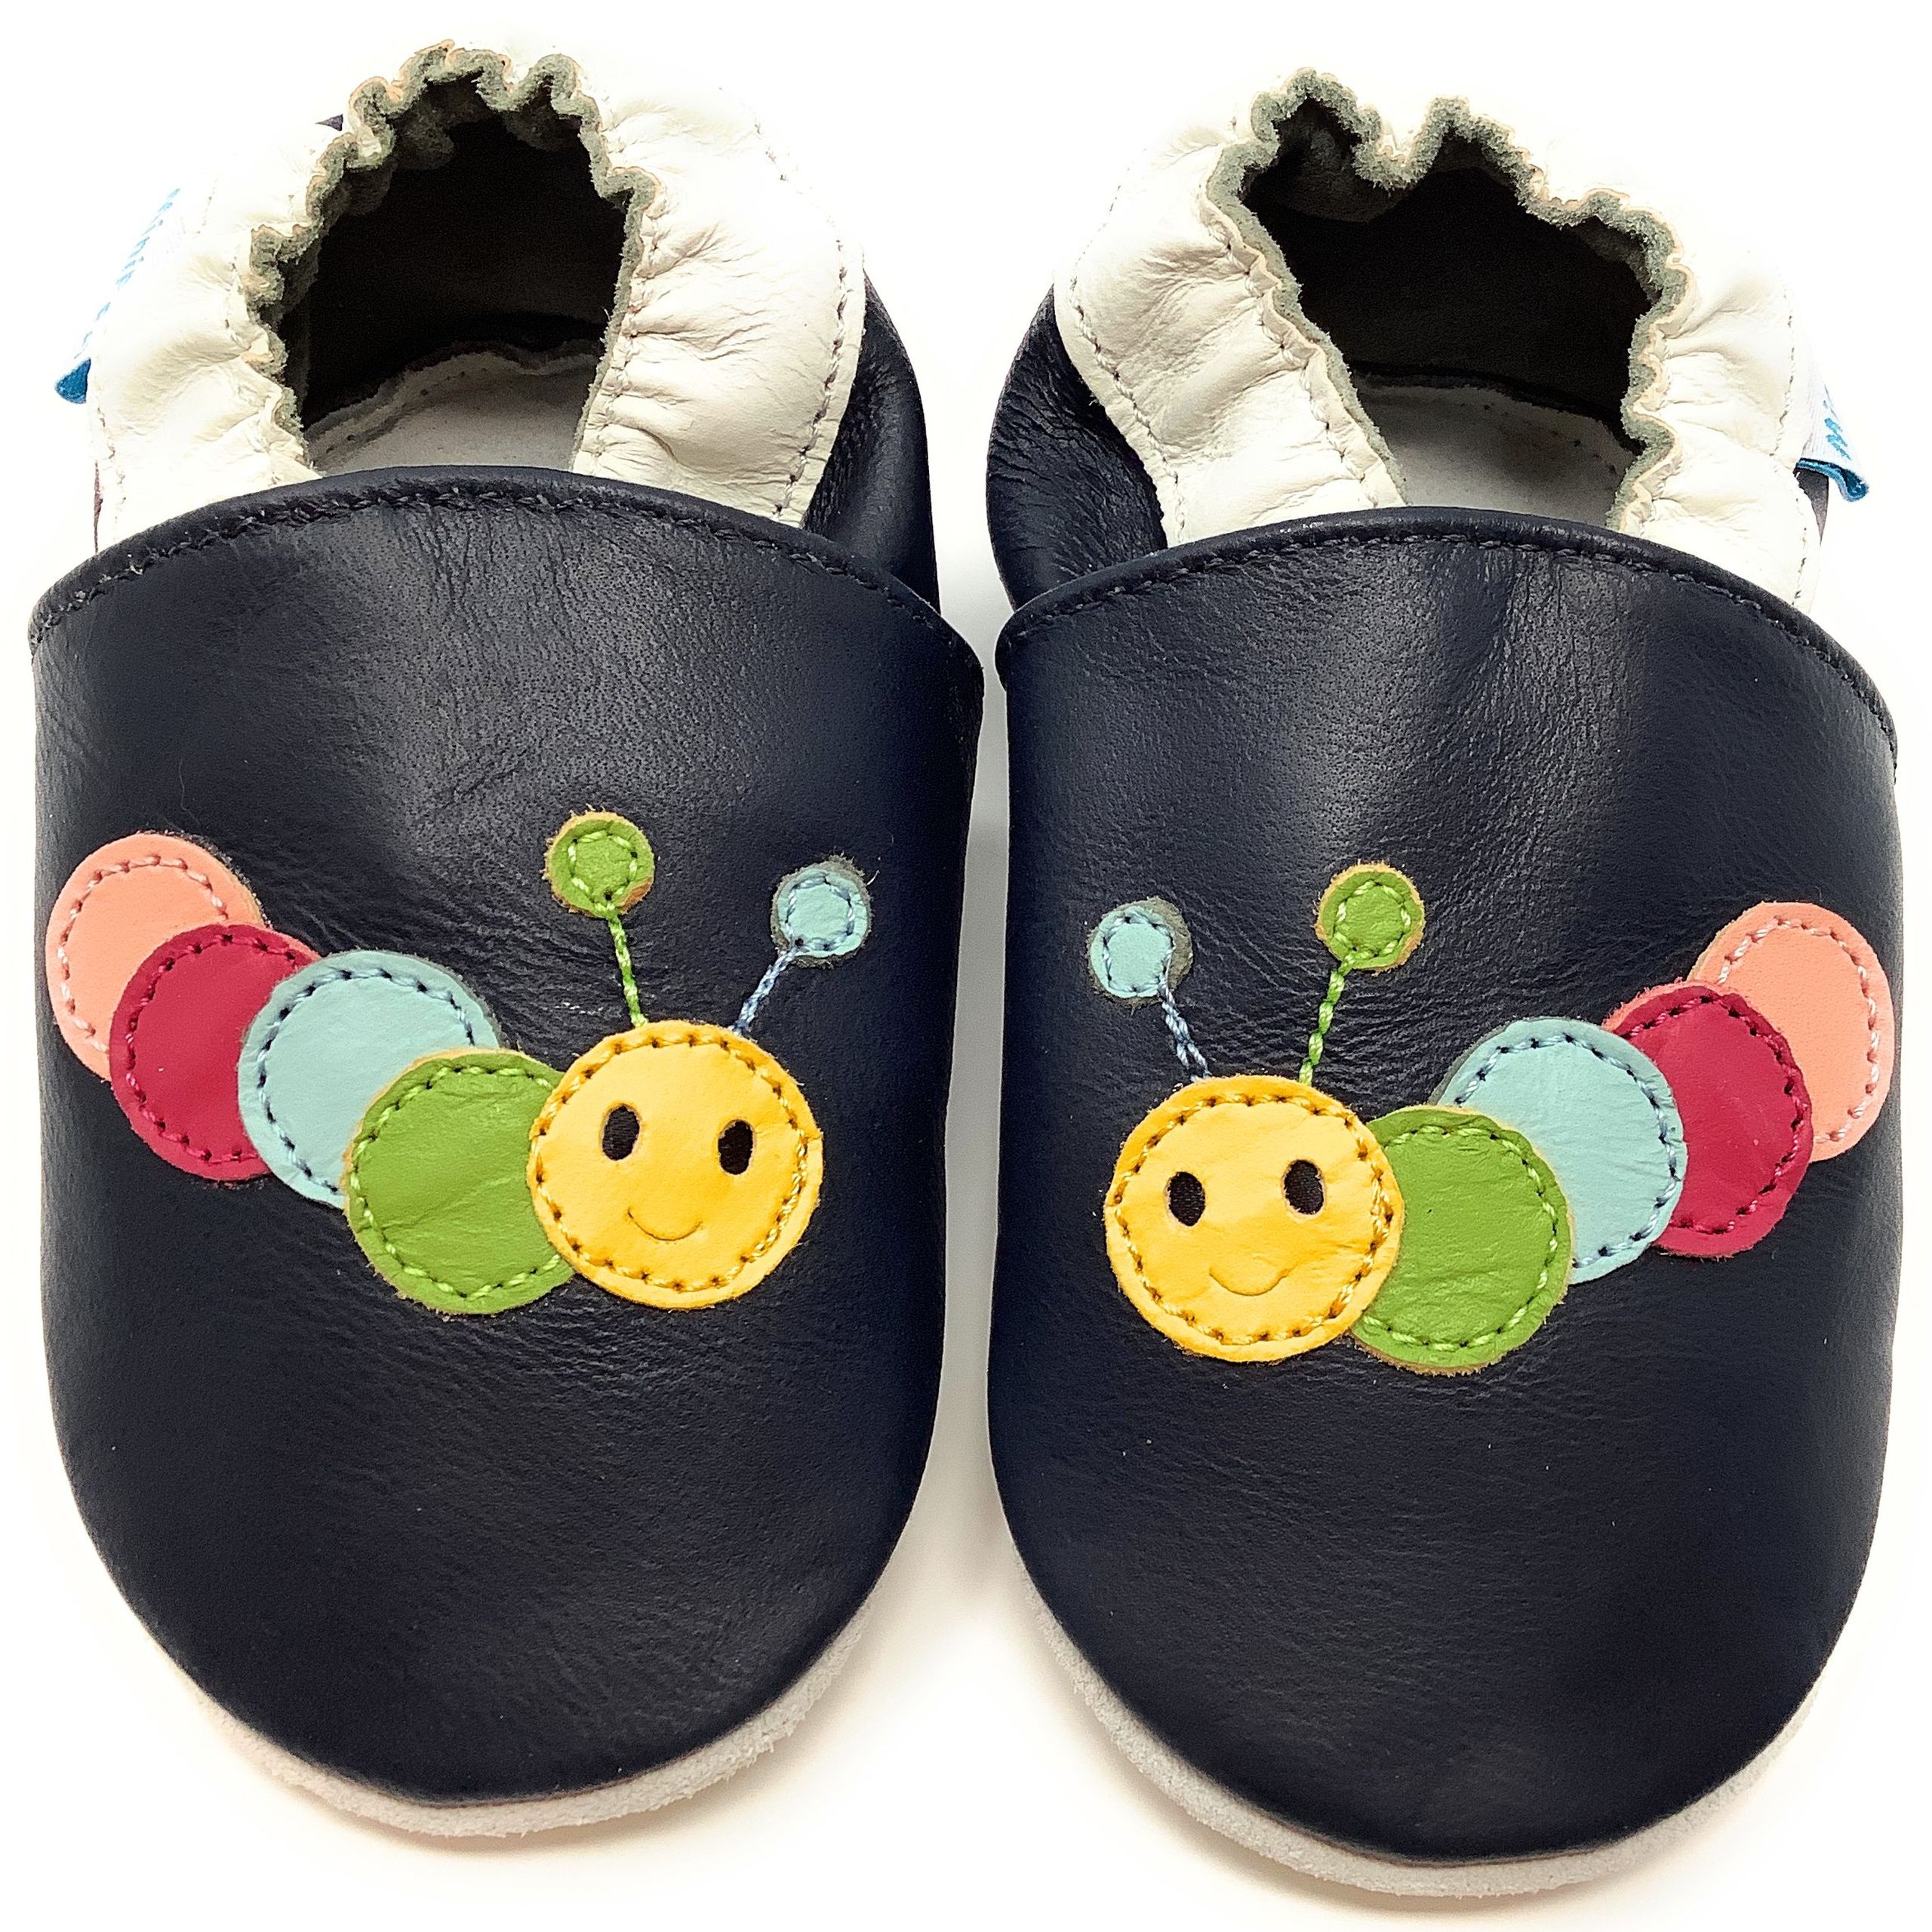 NEW UNISEX SOFT LEATHER BABY SHOES 0-6,6-12,12-18,18-24 mths CATERPILLAR 